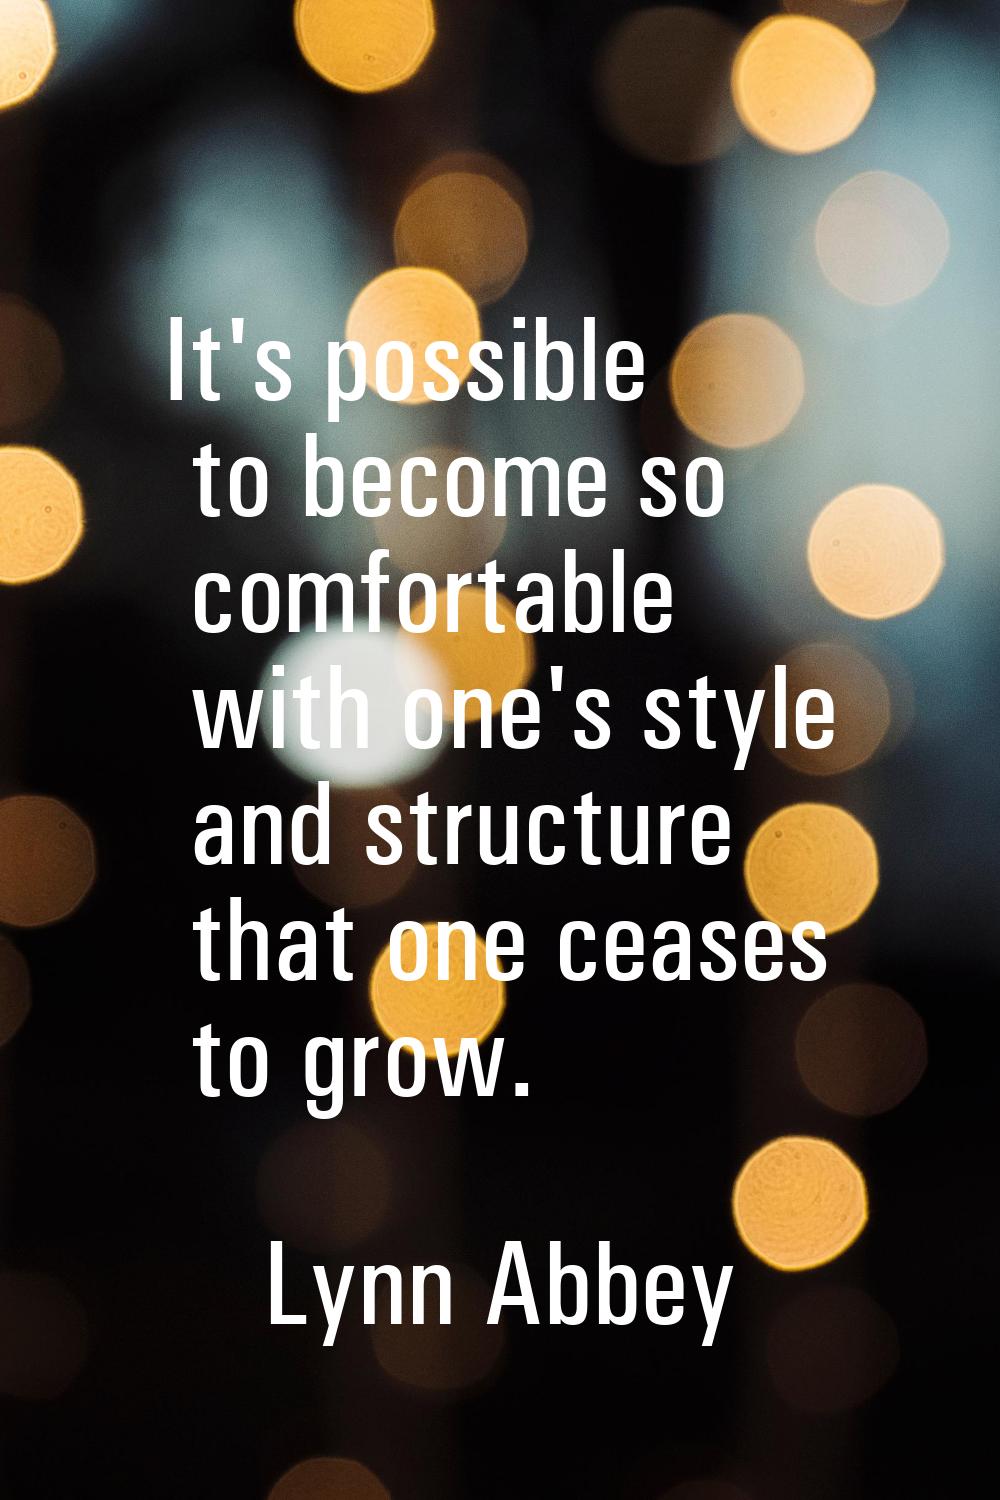 It's possible to become so comfortable with one's style and structure that one ceases to grow.